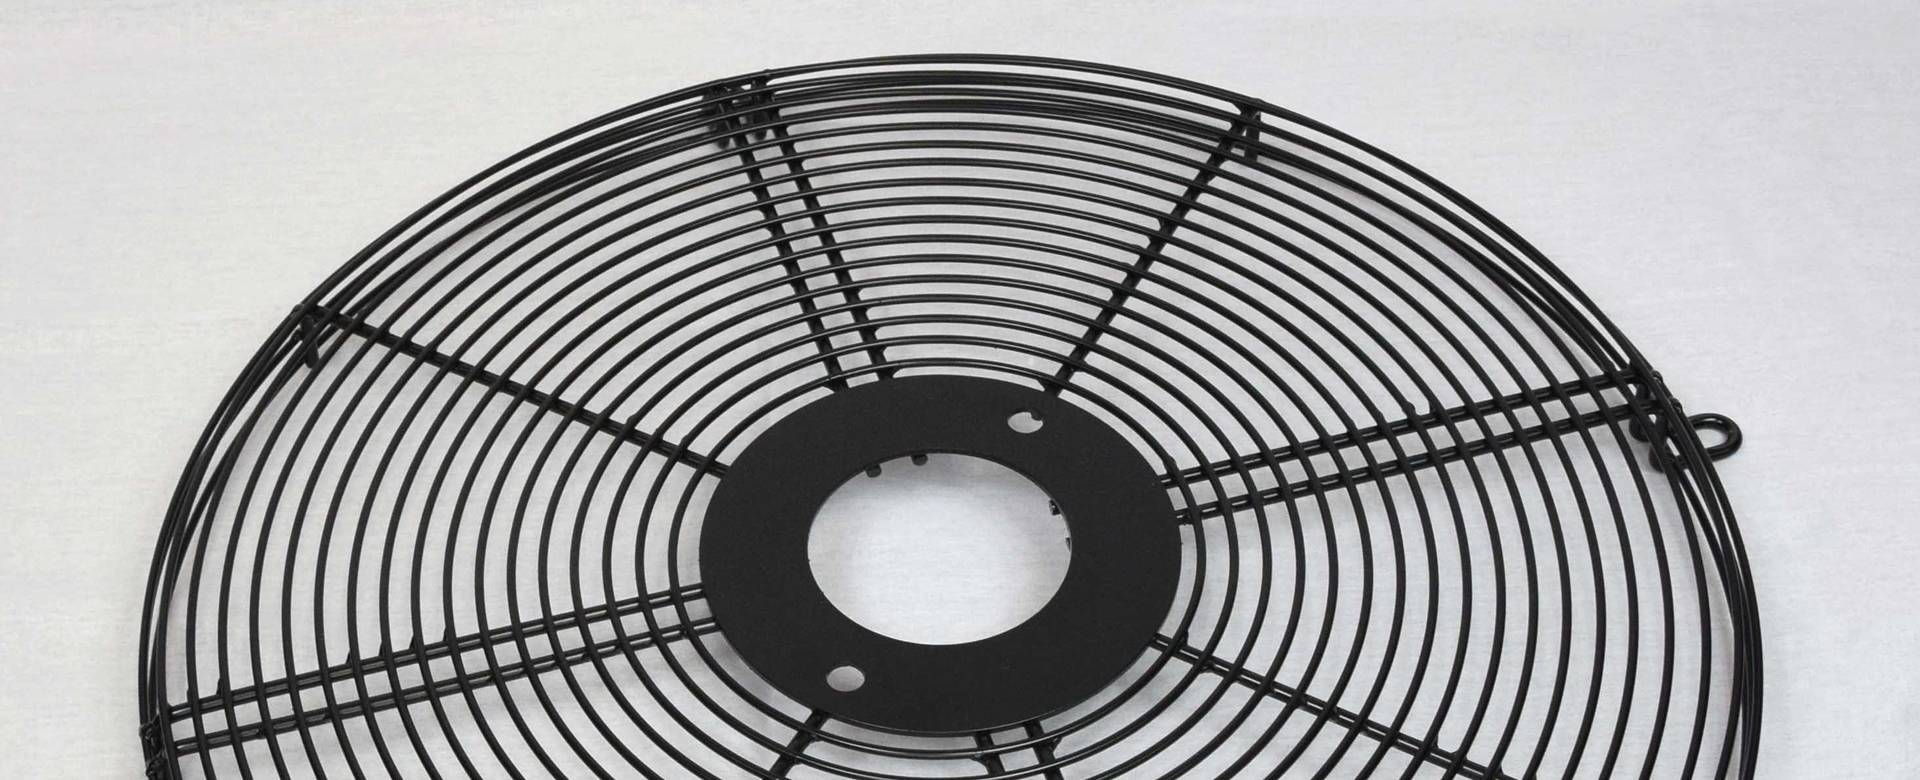 A black dome fan guard with thick metal wire.